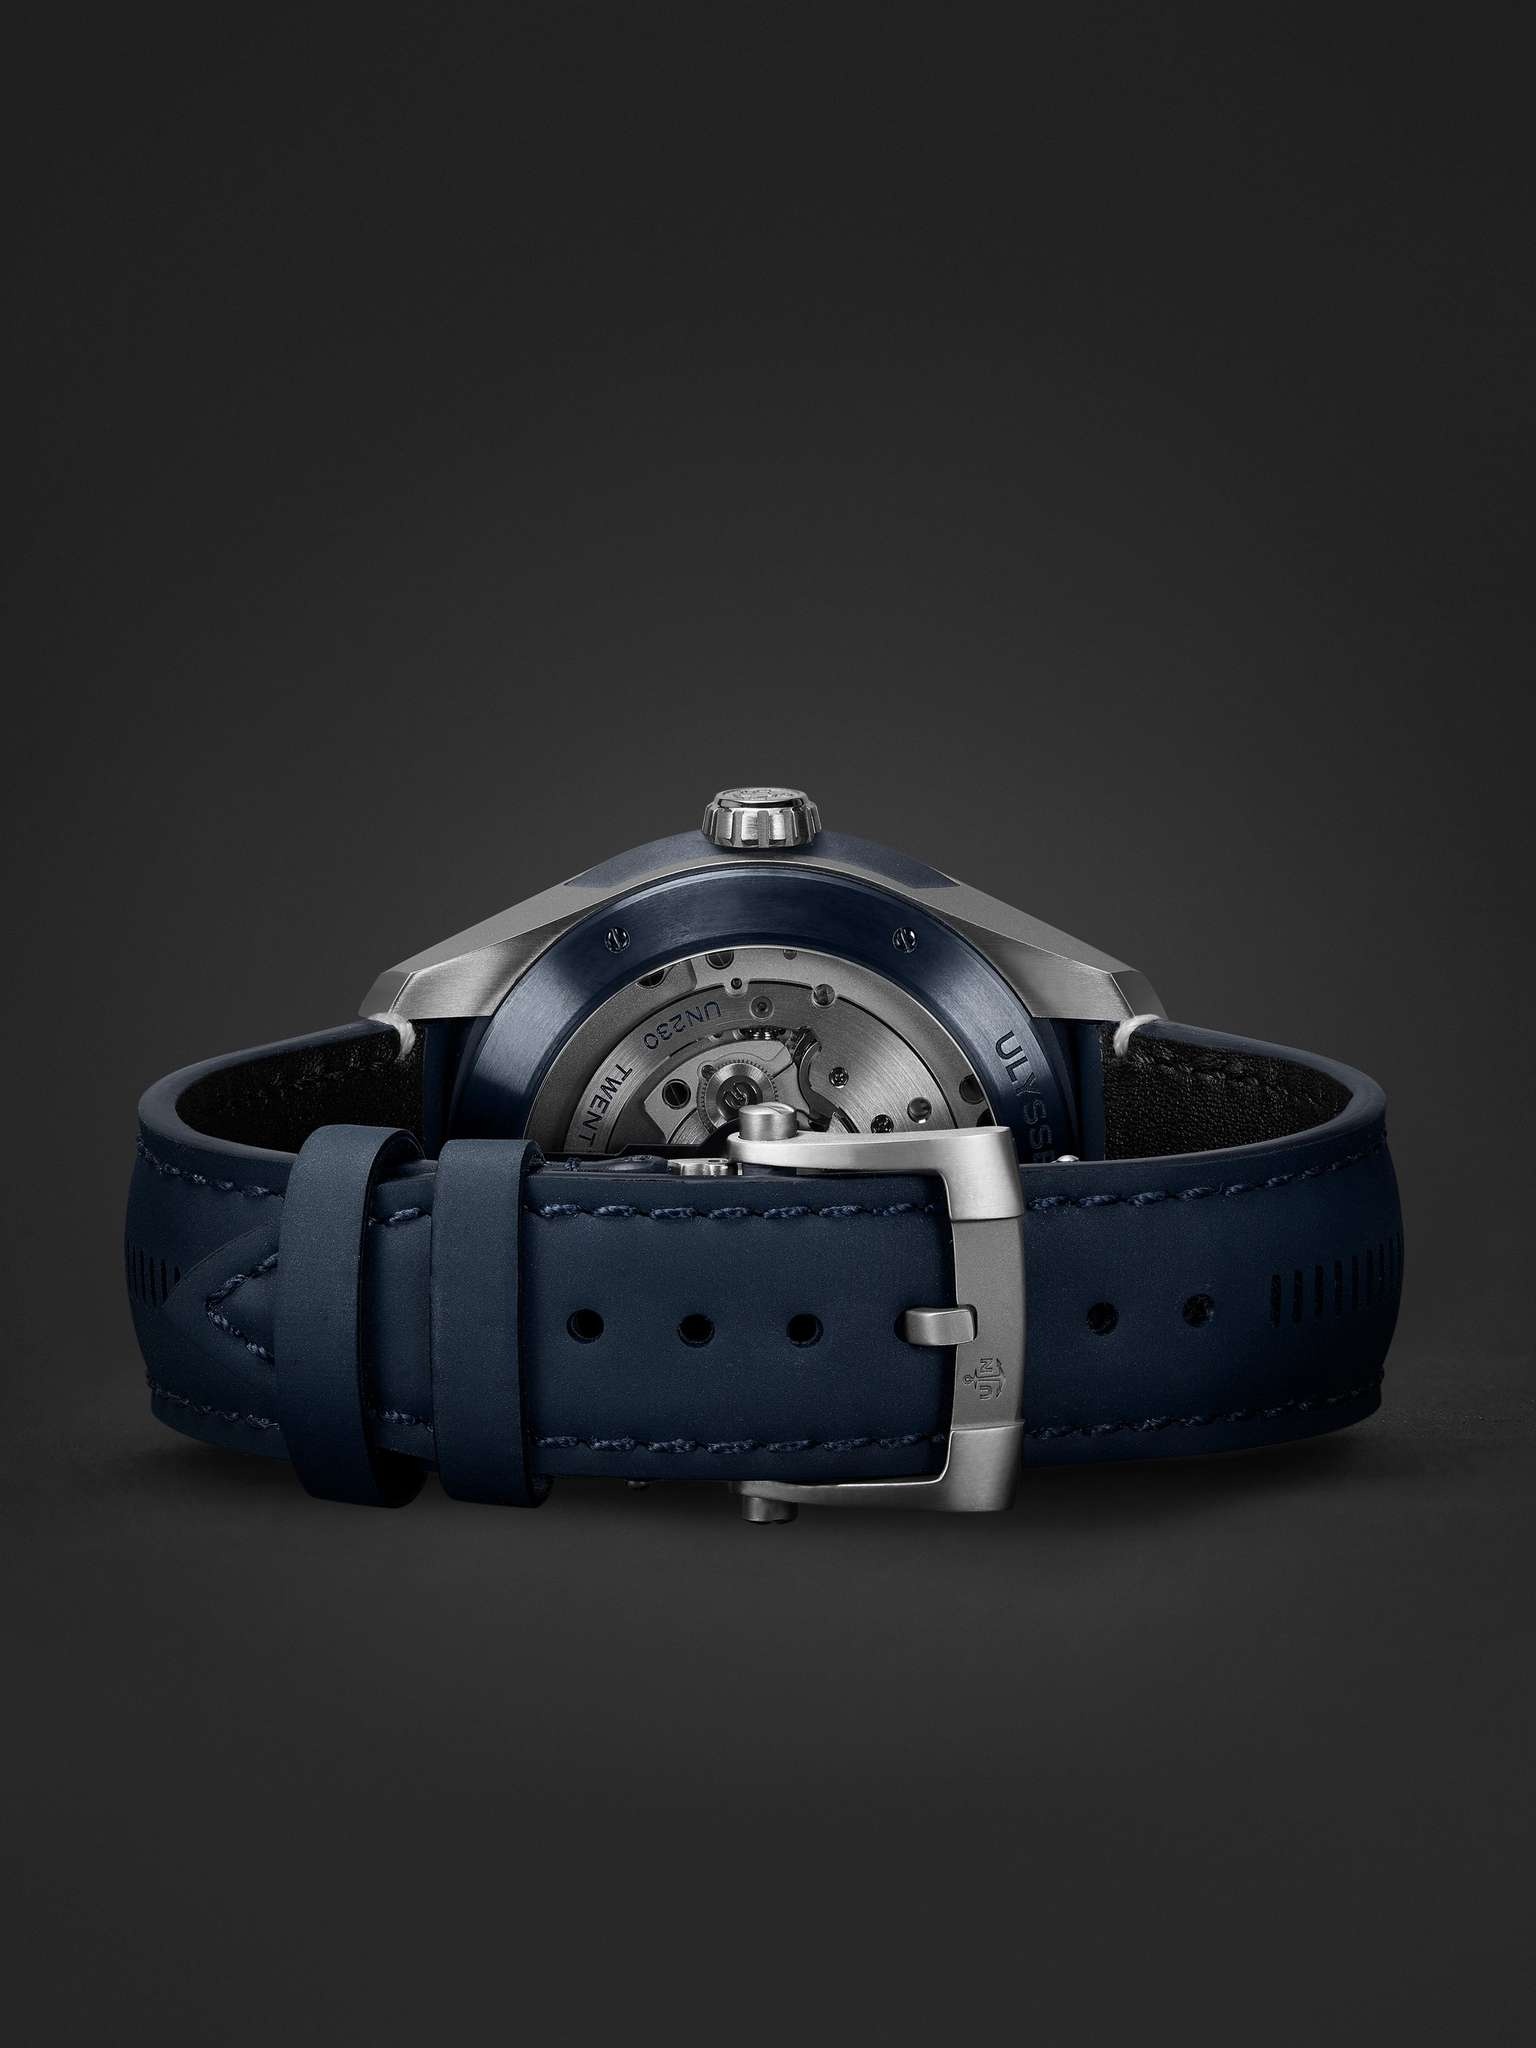 Freak X Automatic 43mm Titanium and Leather Watch, Ref. No. 2303-270.1/03 - 7